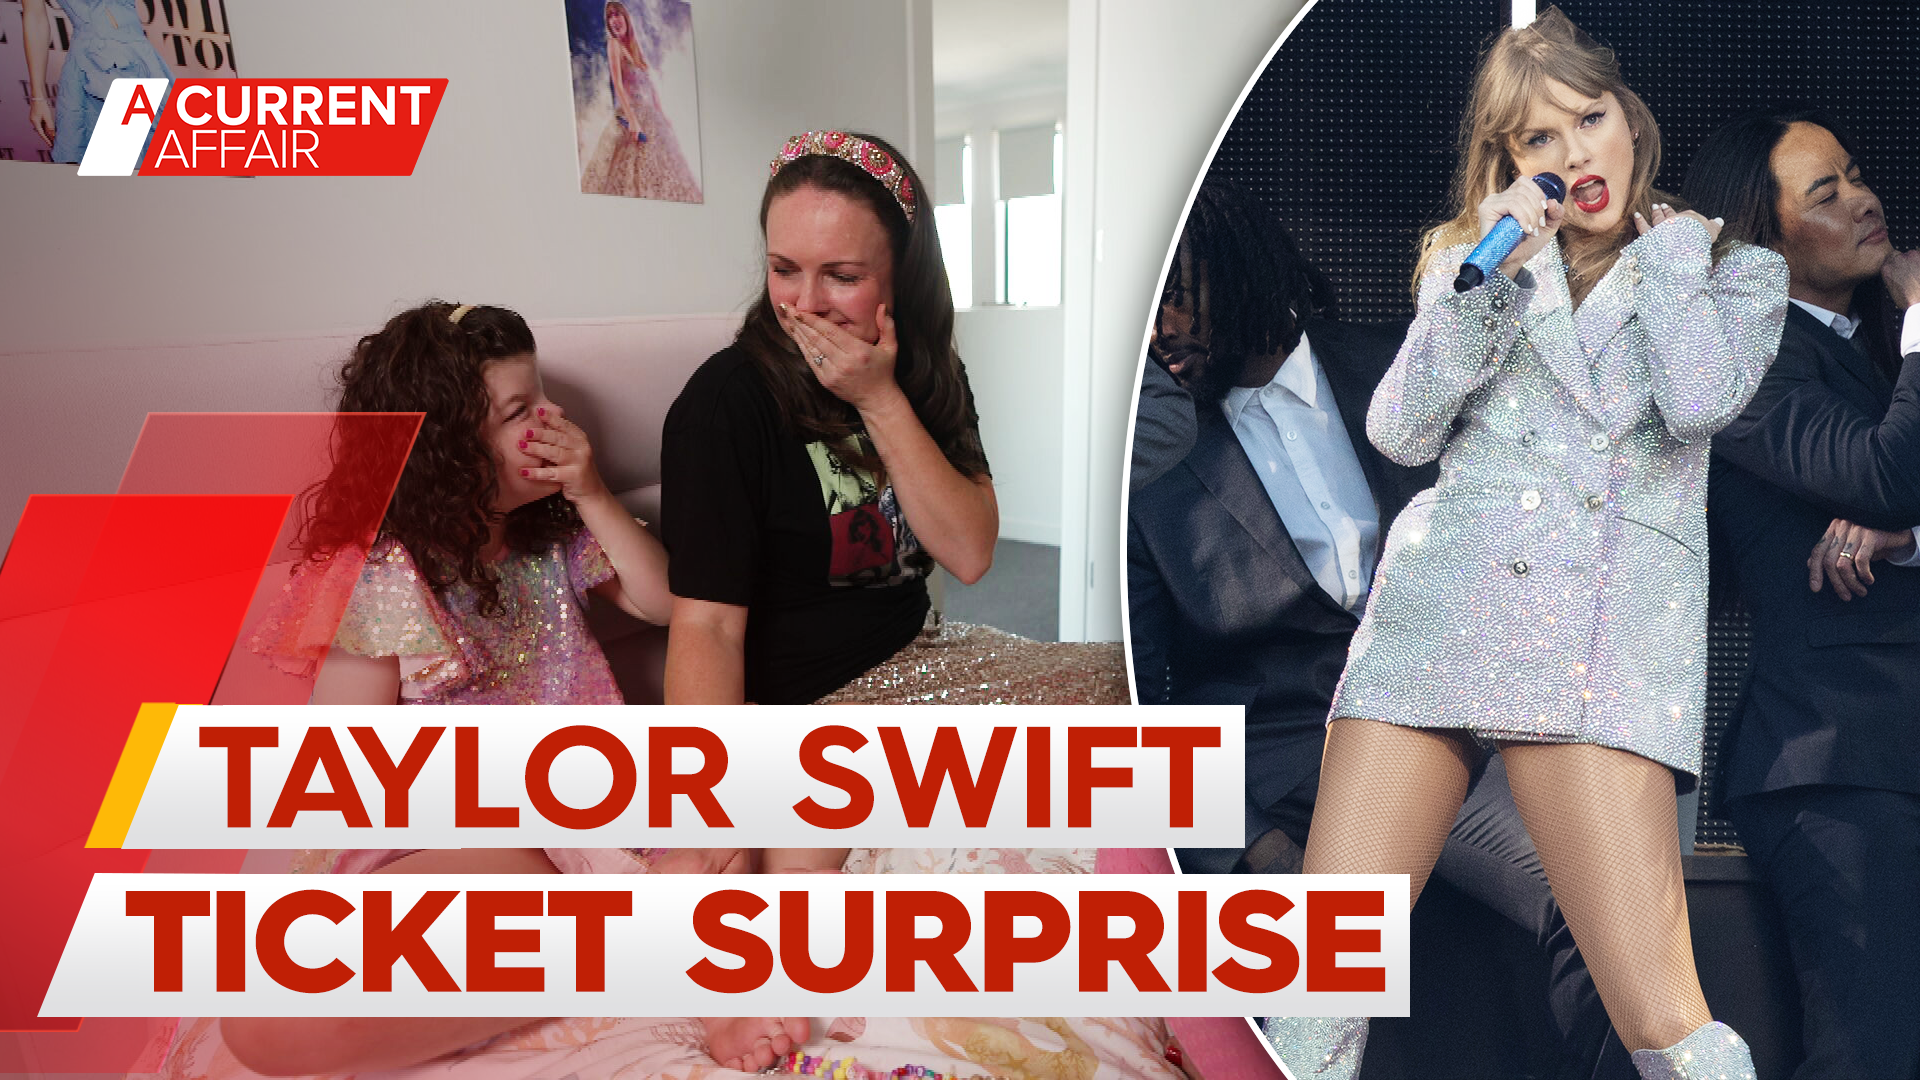 Young girl's dreams come true with Taylor Swift ticket surprise